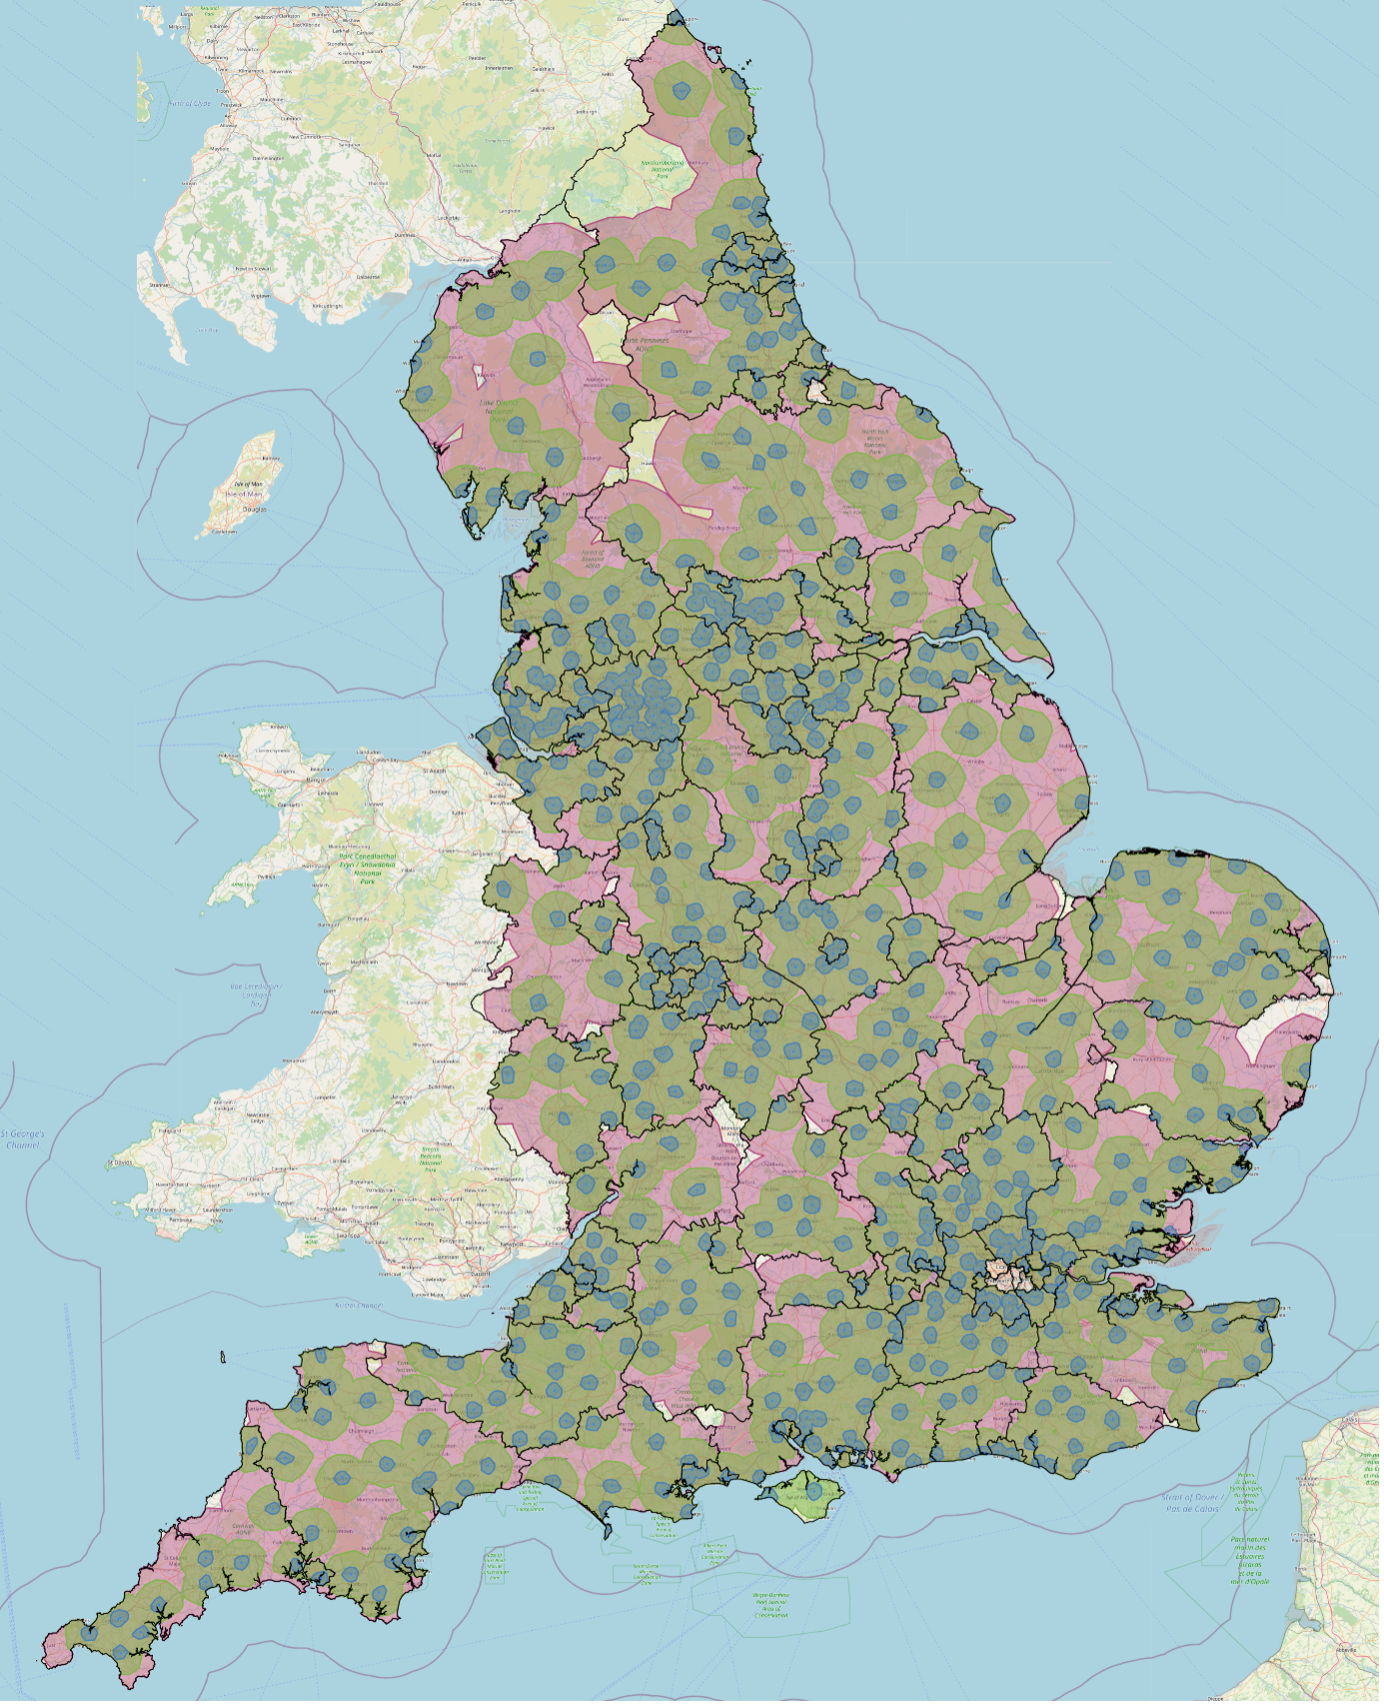 A map of recycling sites in England showing drive times to each site